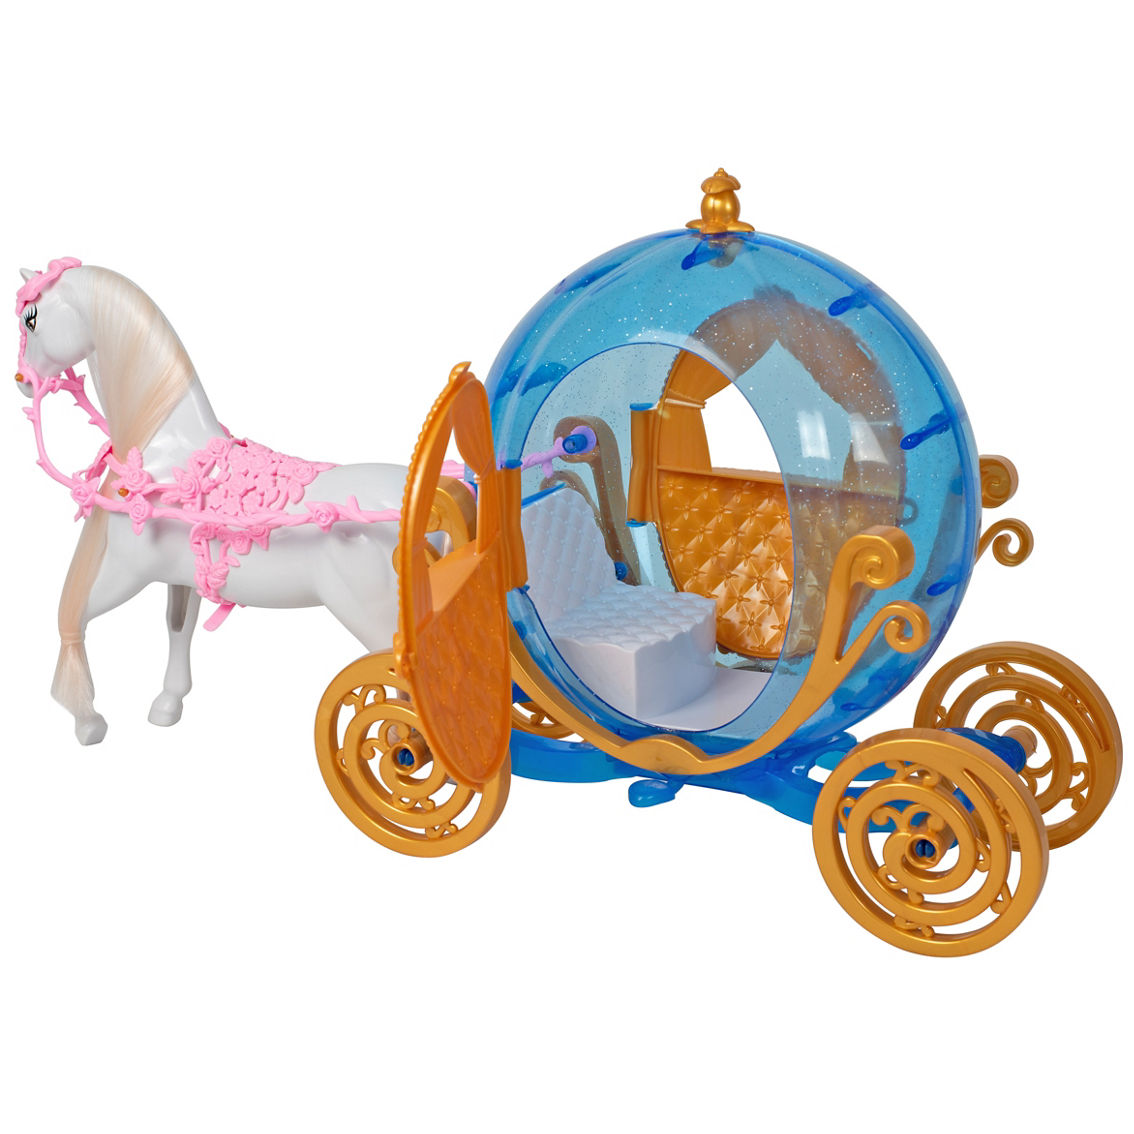 Chic Princess Doll with Horse and Carriage - Image 4 of 4